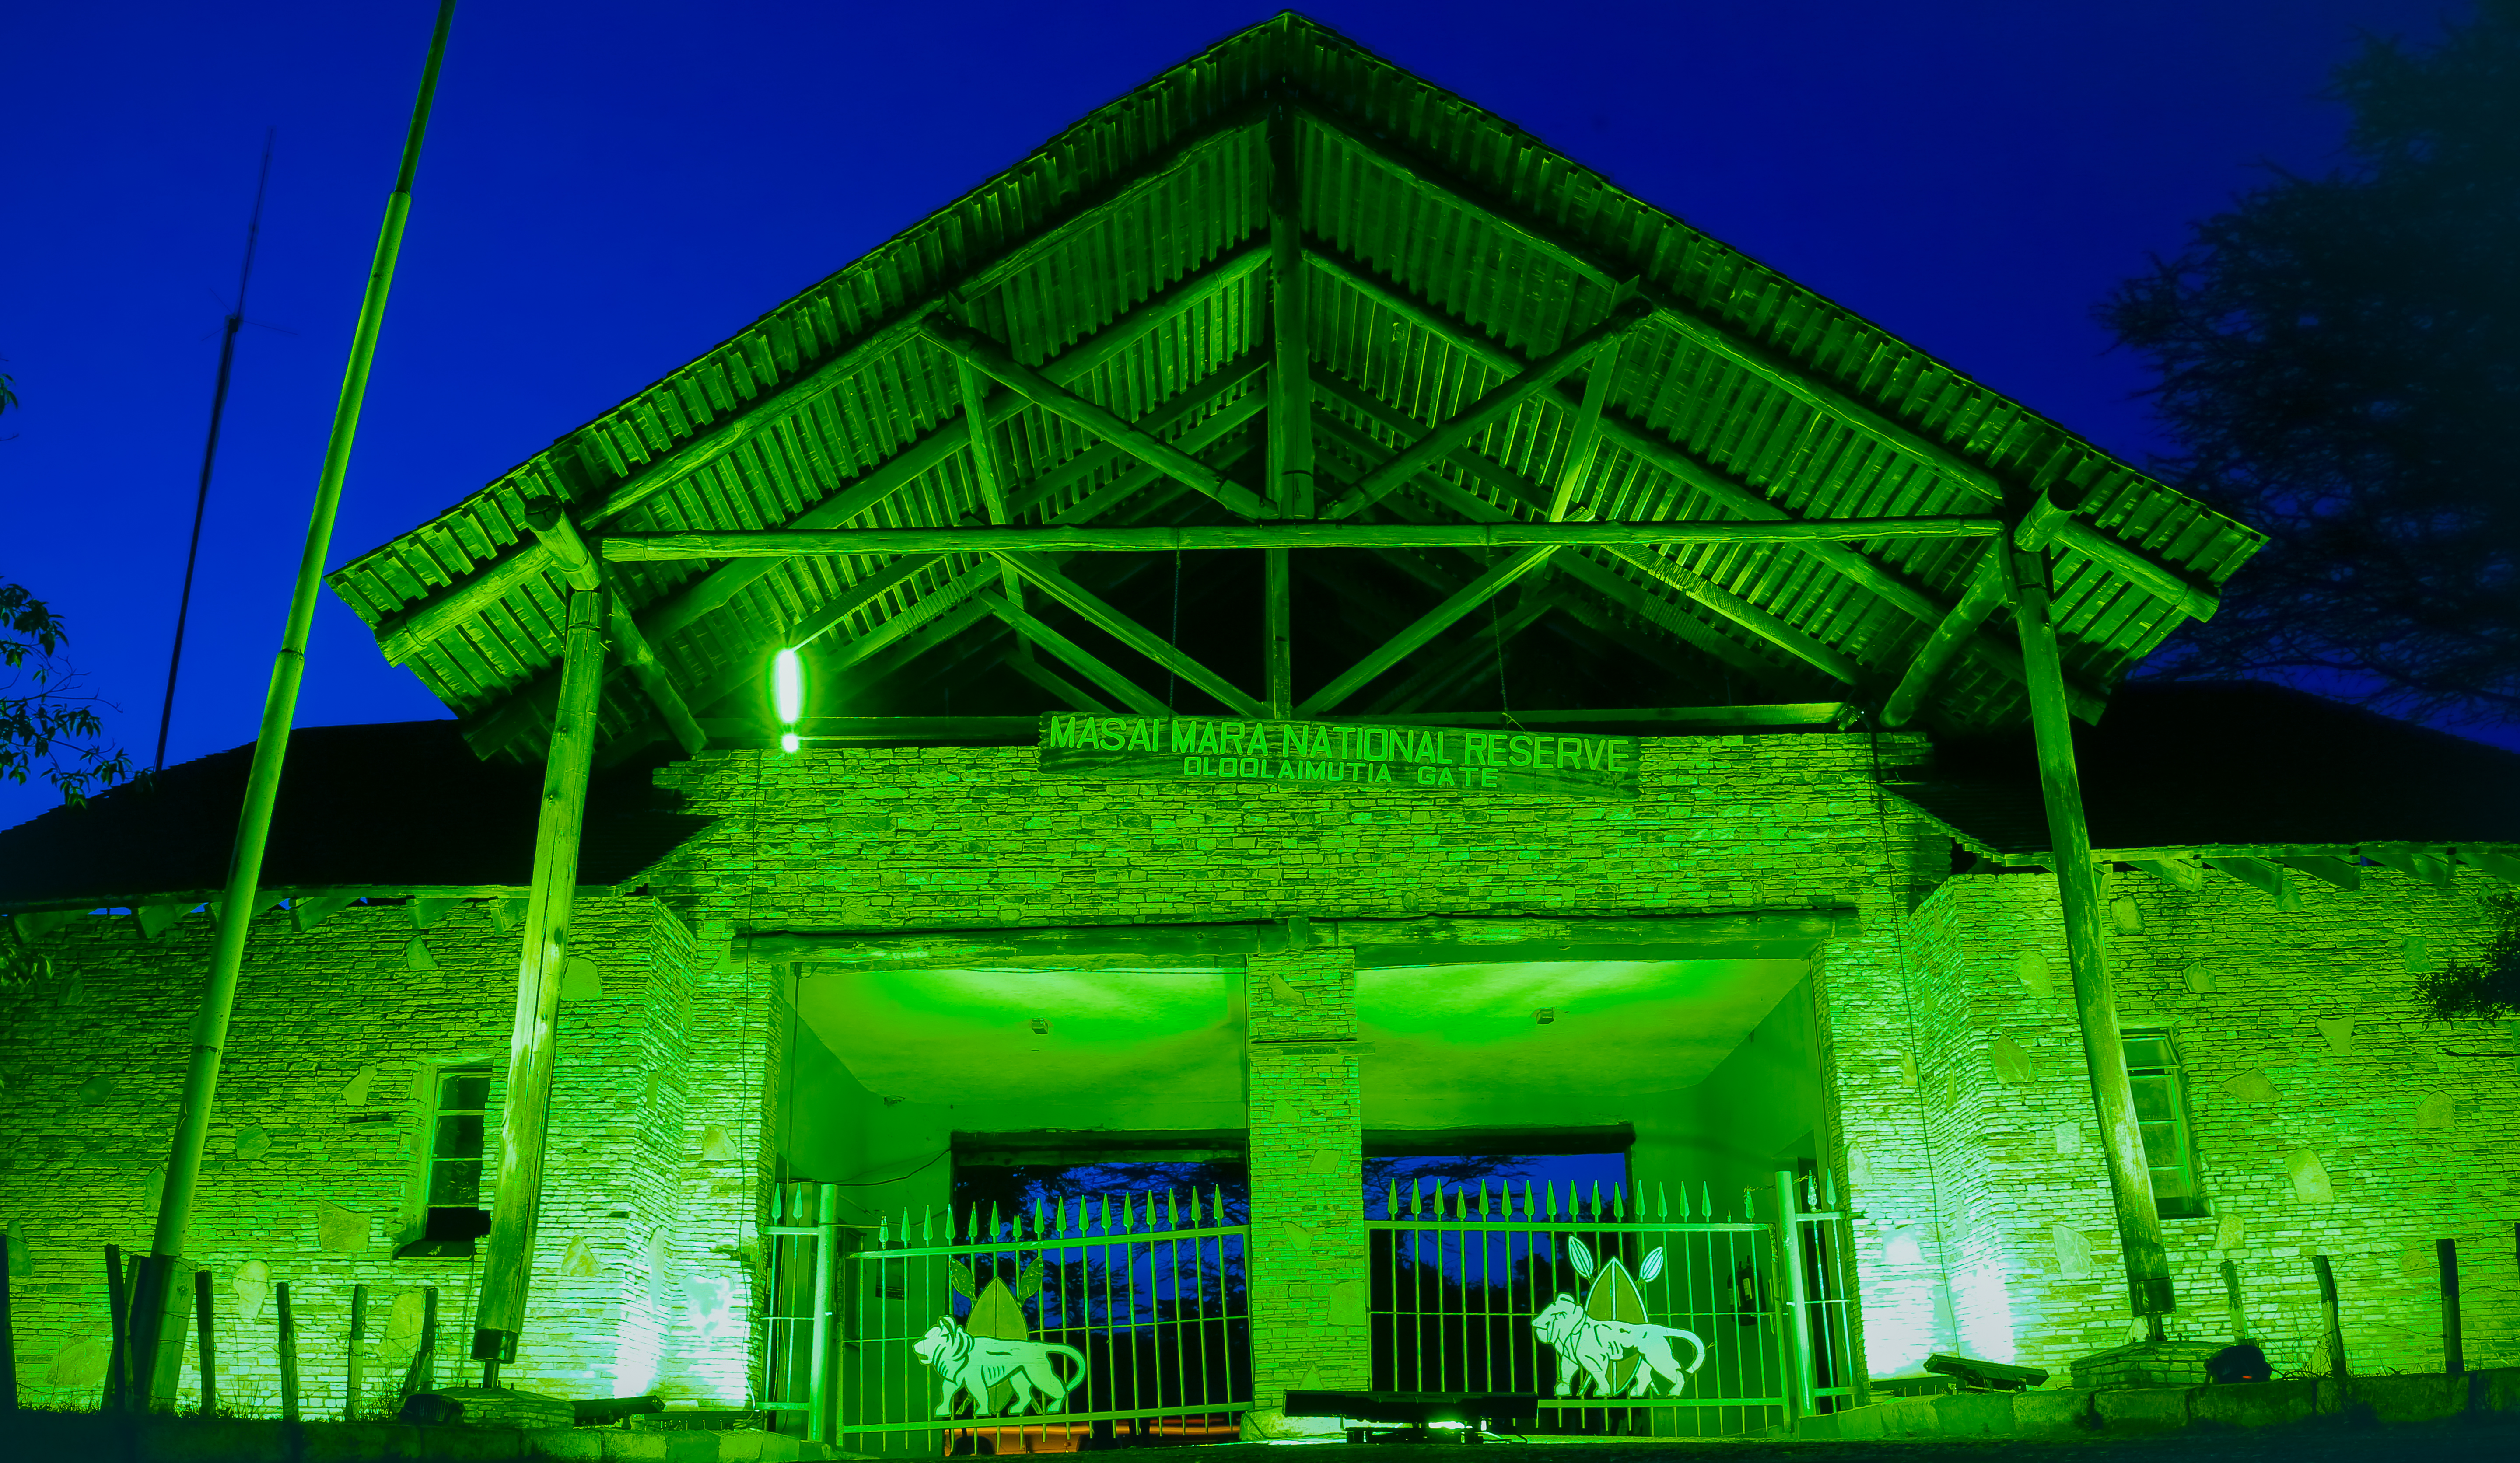 The Masai Mara joins the ‘Global Greening’ to mark St Patrick’s Day, March 17